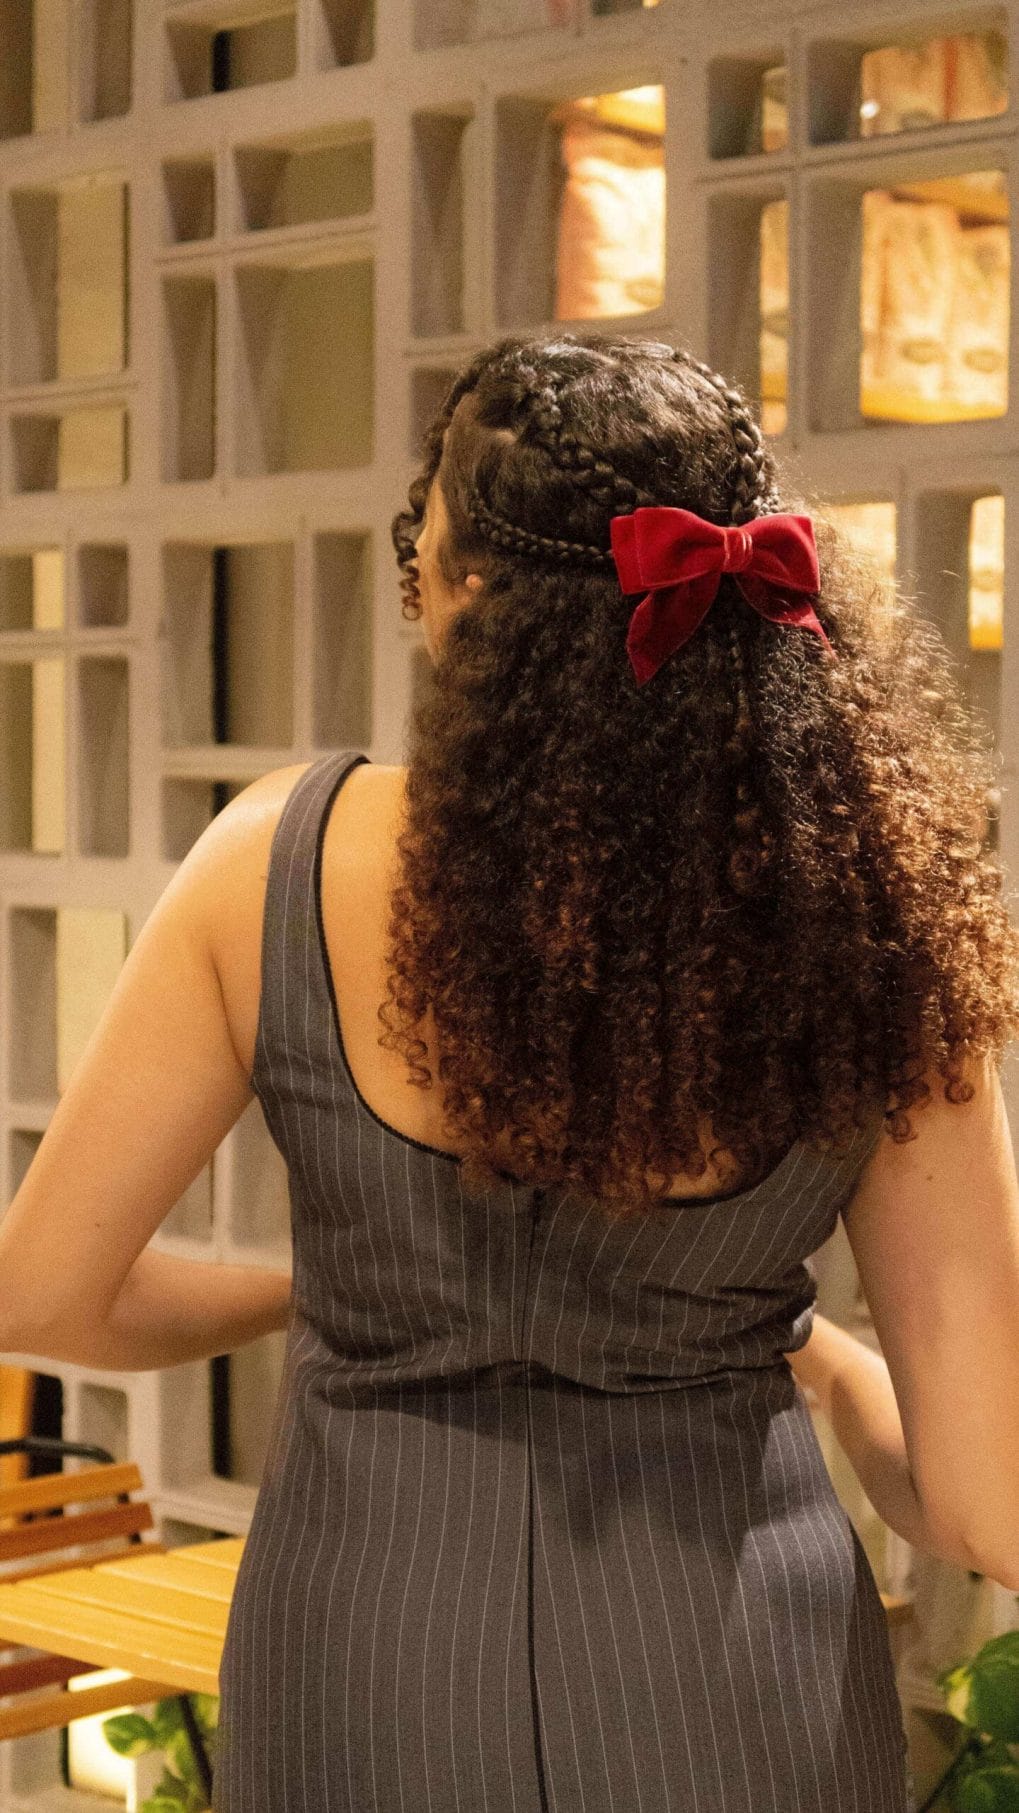 Braided crown with curly ponytail adorned by a bold red bow in natural tones